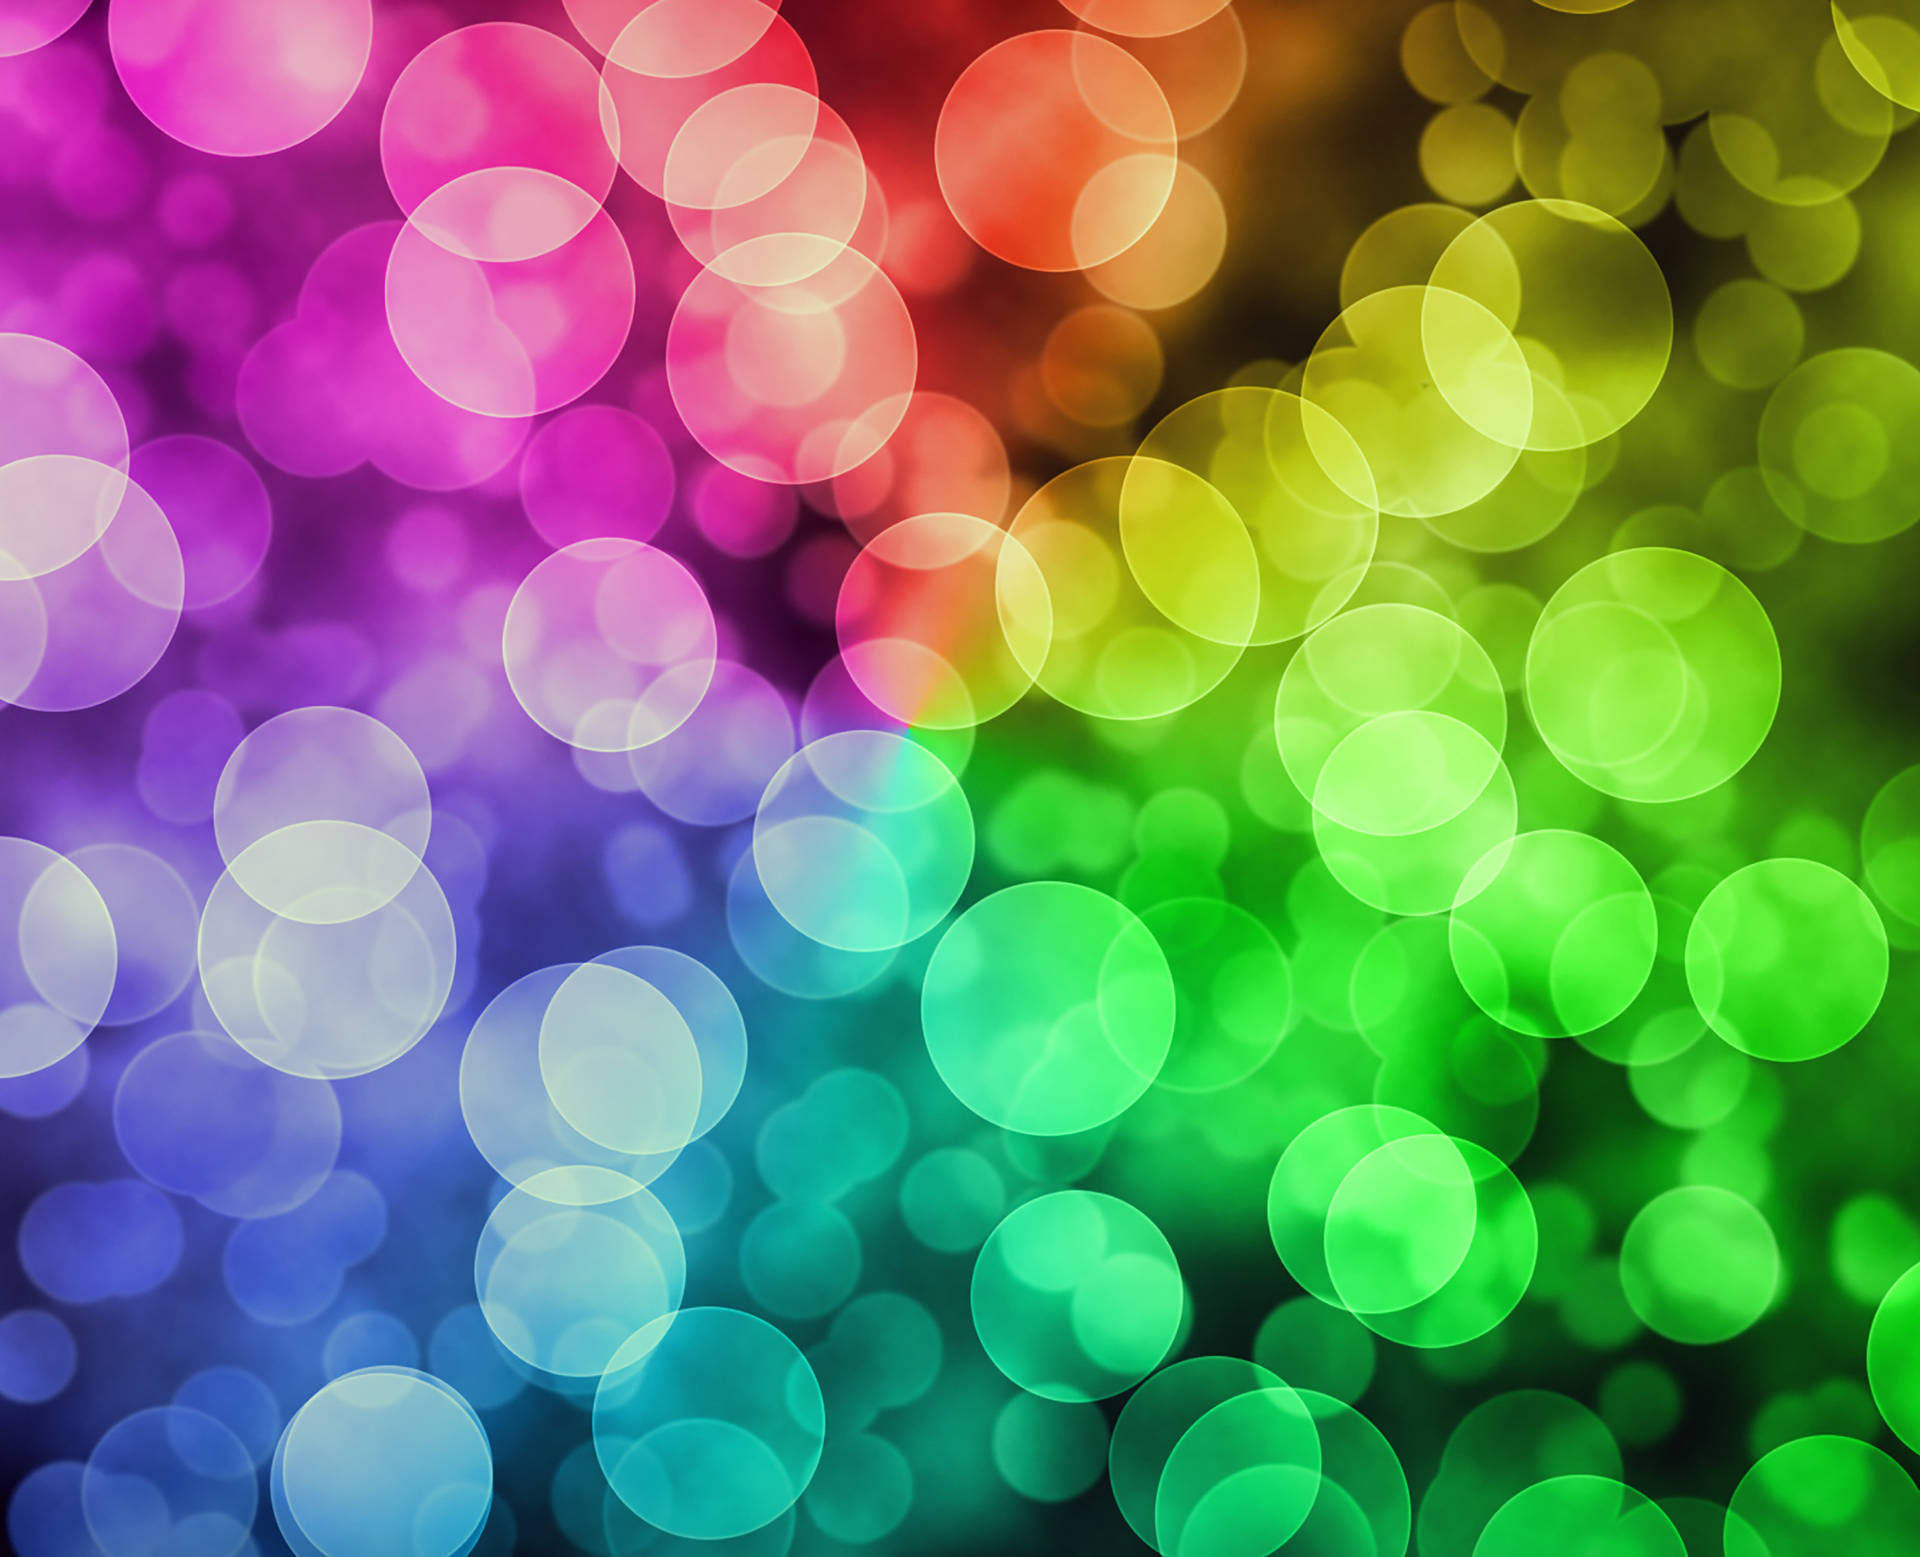 Abstract Multicolored Blurry Lights